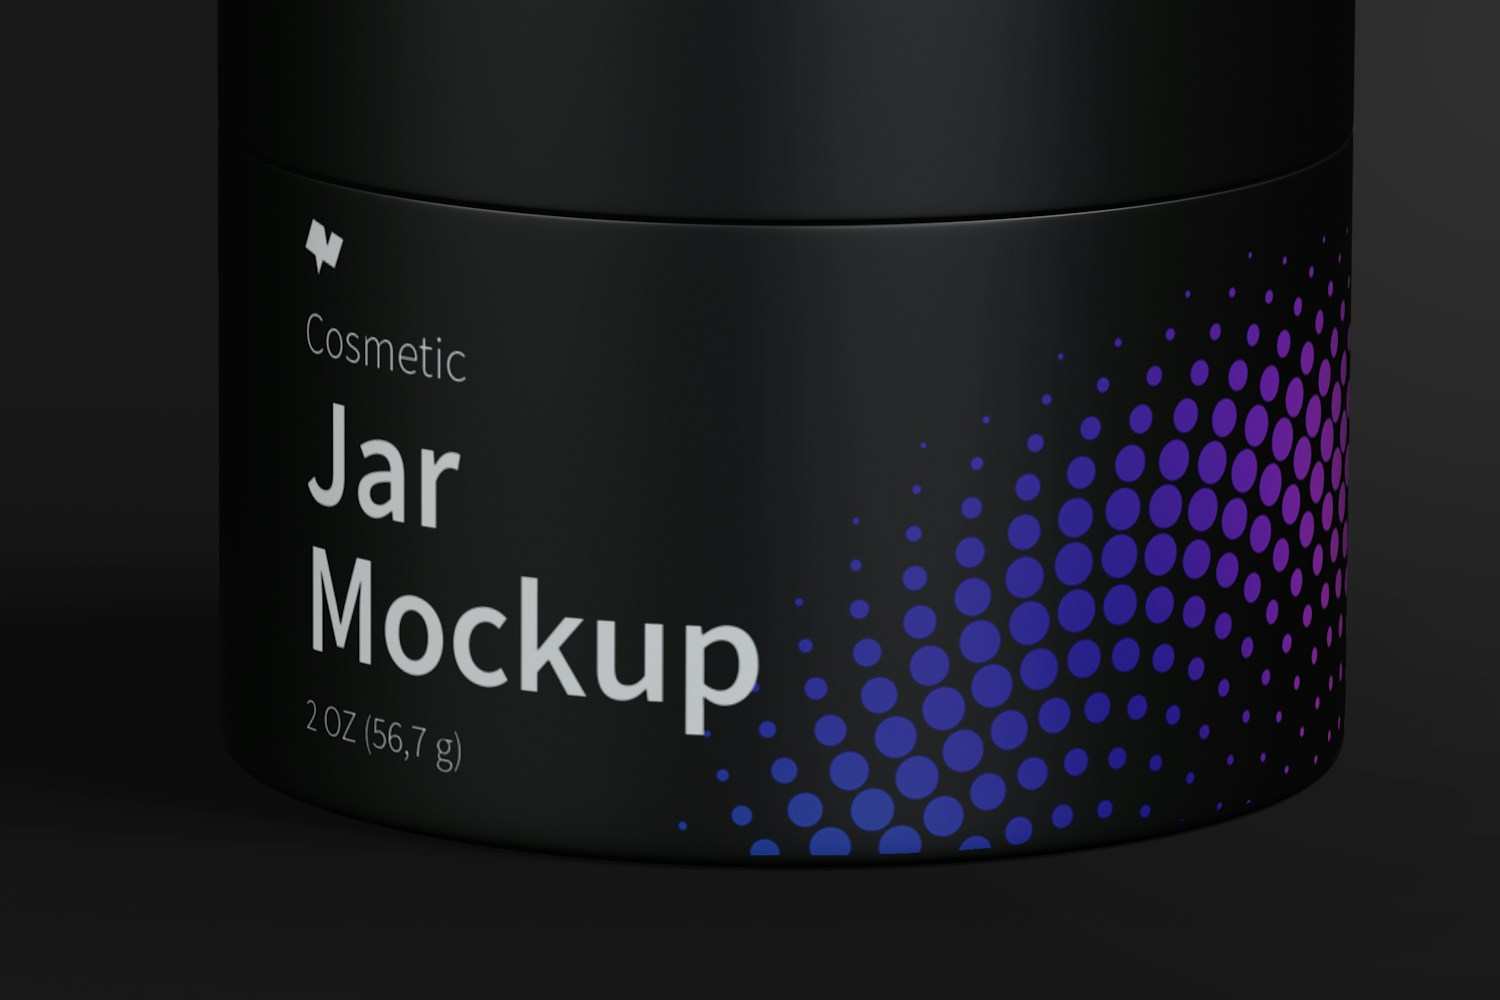 Cosmetic Jar Mockup, Front View 02